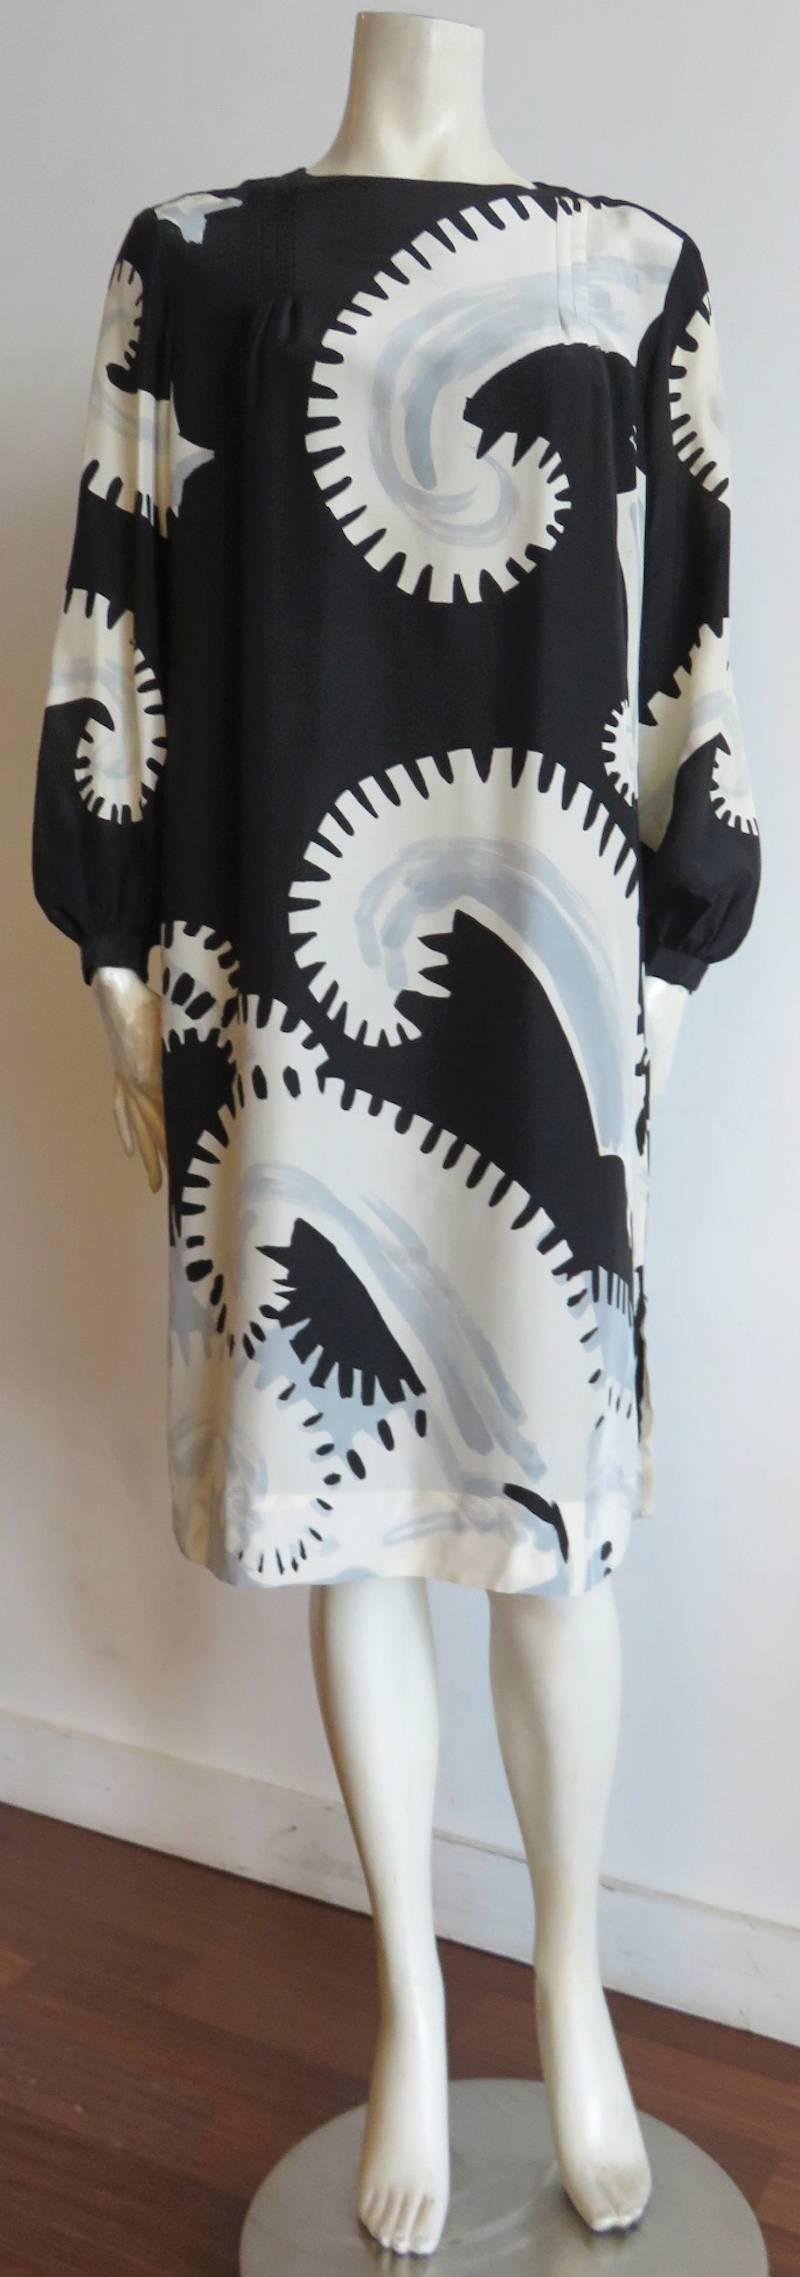 Excellent condition, 1980's MICHAELE VOLLBRACHT printed silk dress.

Gorgeous, painted artwork featuring jagged, paisley-style spirals in ivory and gray atop black ground.

Triple, darted construction detail at top front, and back.

Key-hole